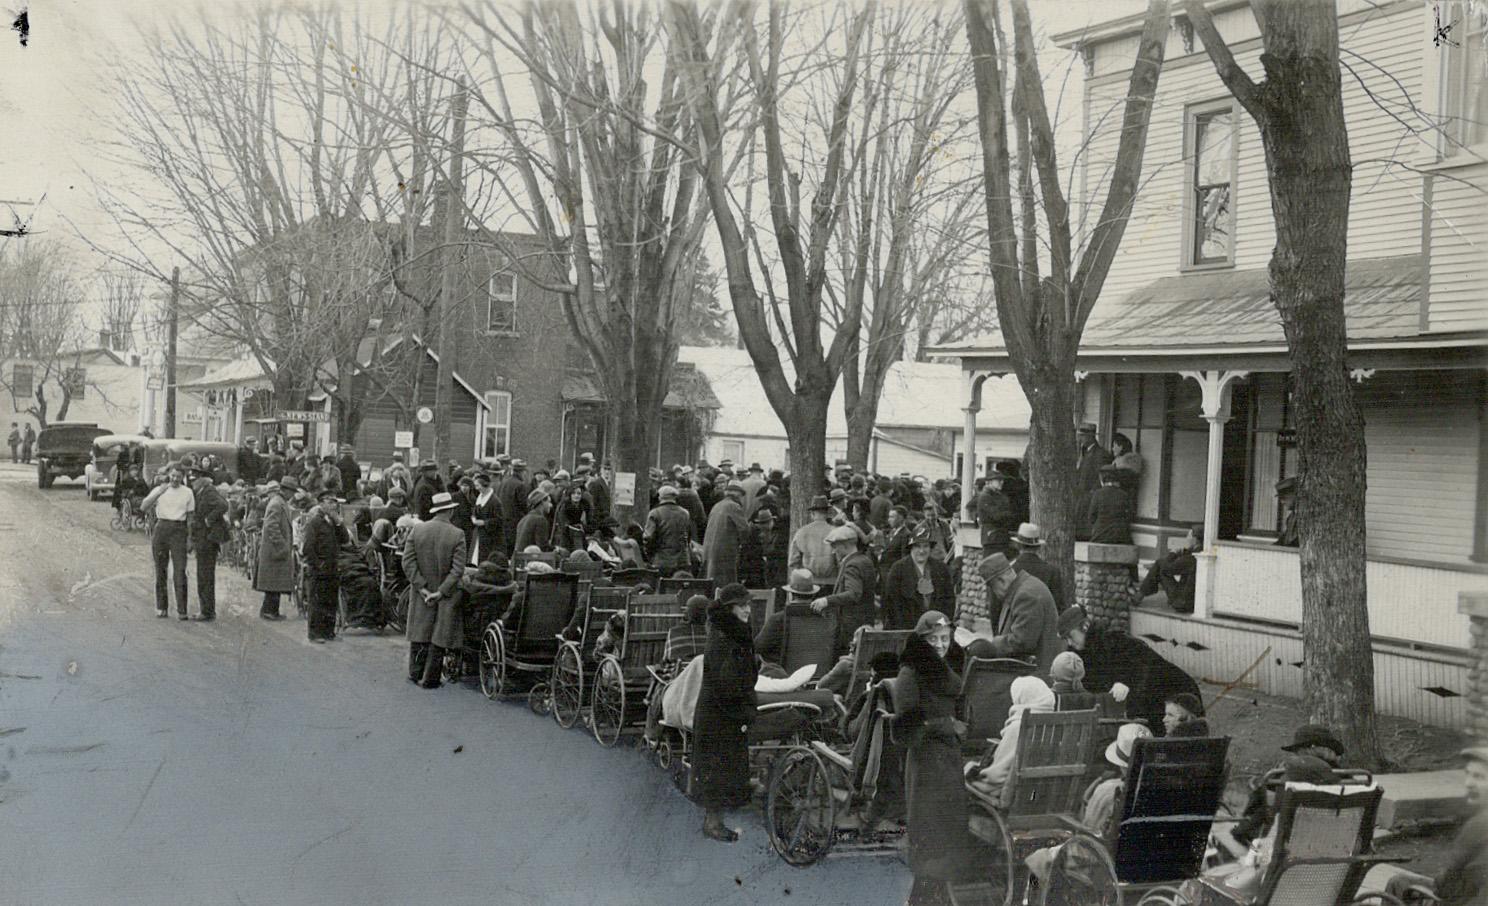 Thousands came in wheel chairs to be relieved of suffering. The fame of Dr. Locke's work spread all over the world, and patients came from everywhere. Here is a typical scene of the famed barnyard clinic at Williamburg at the height of its popularity. He charged $1 a day for treatment and was to have given as many as 800 treatments in a single day.